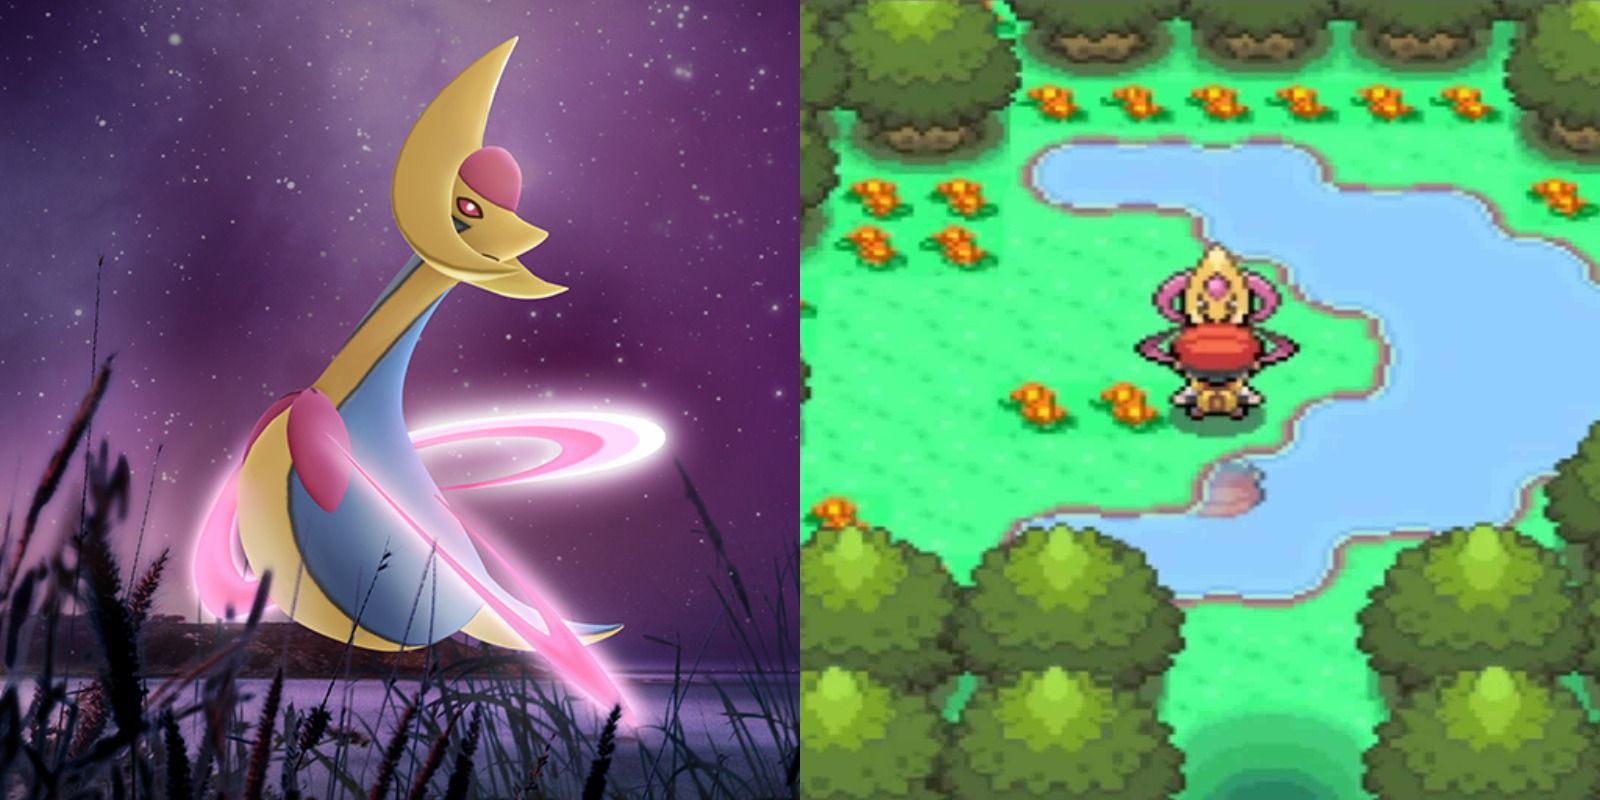 Cresselia promo for Pokémon GO and the in-game event in the DS games